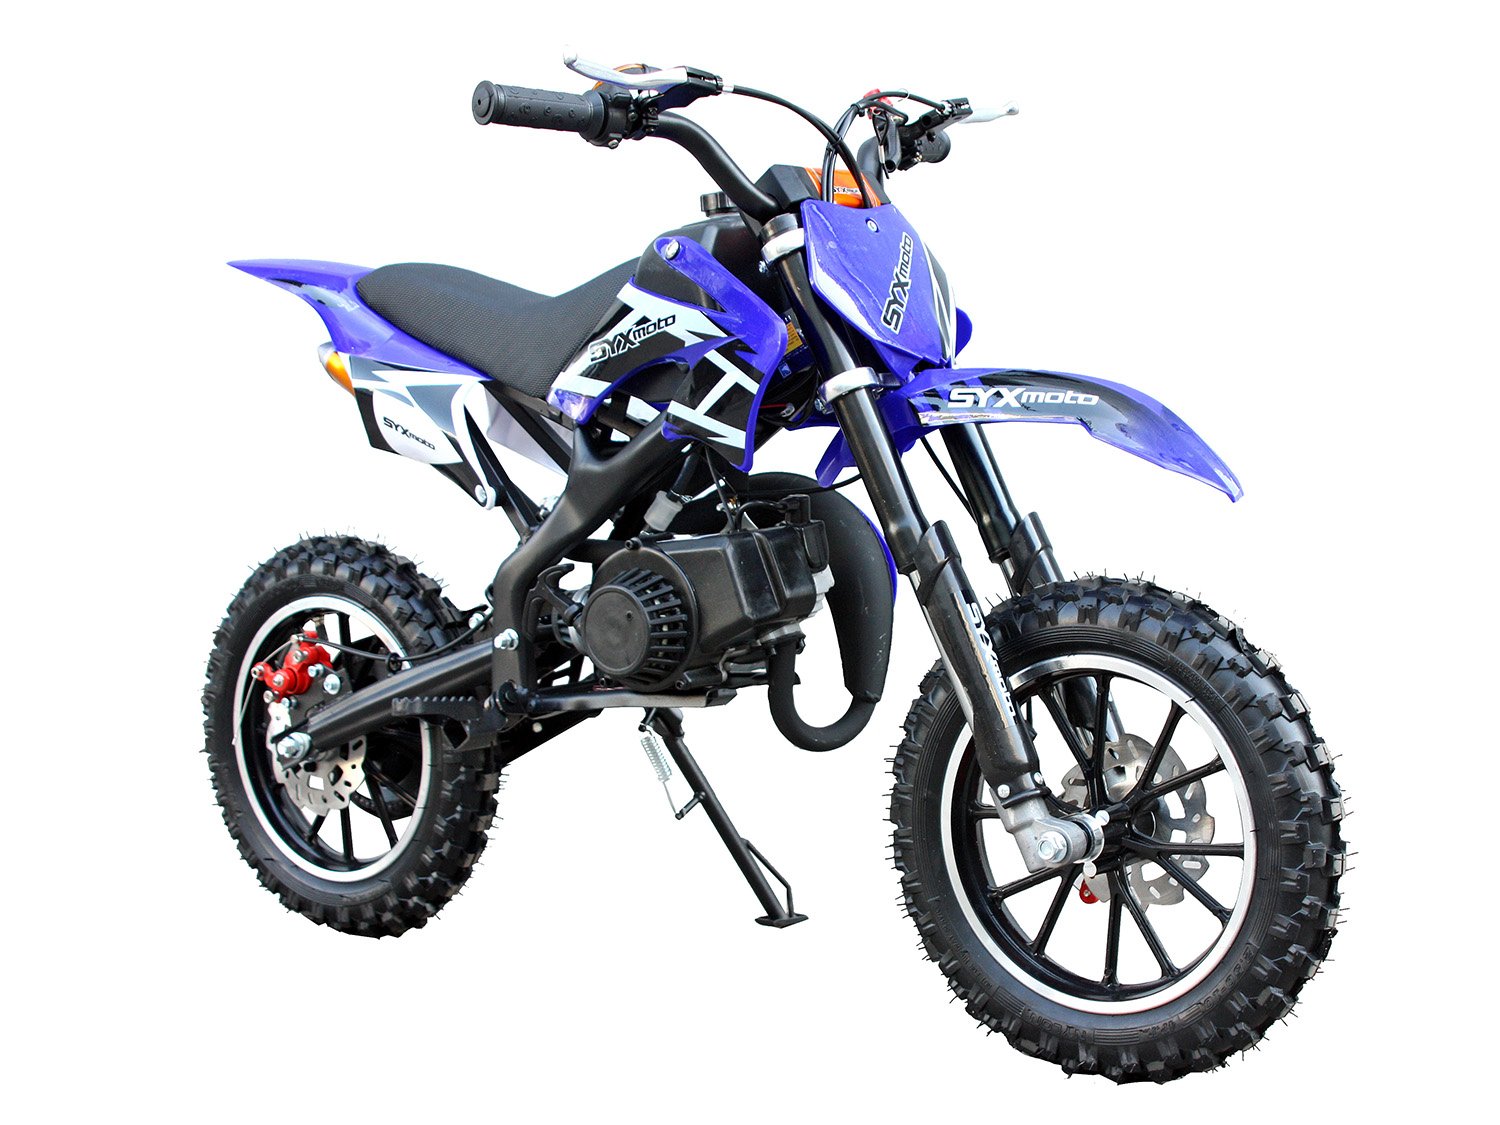 Syx Moto The 300 50cc pit bike you gotta have. Full